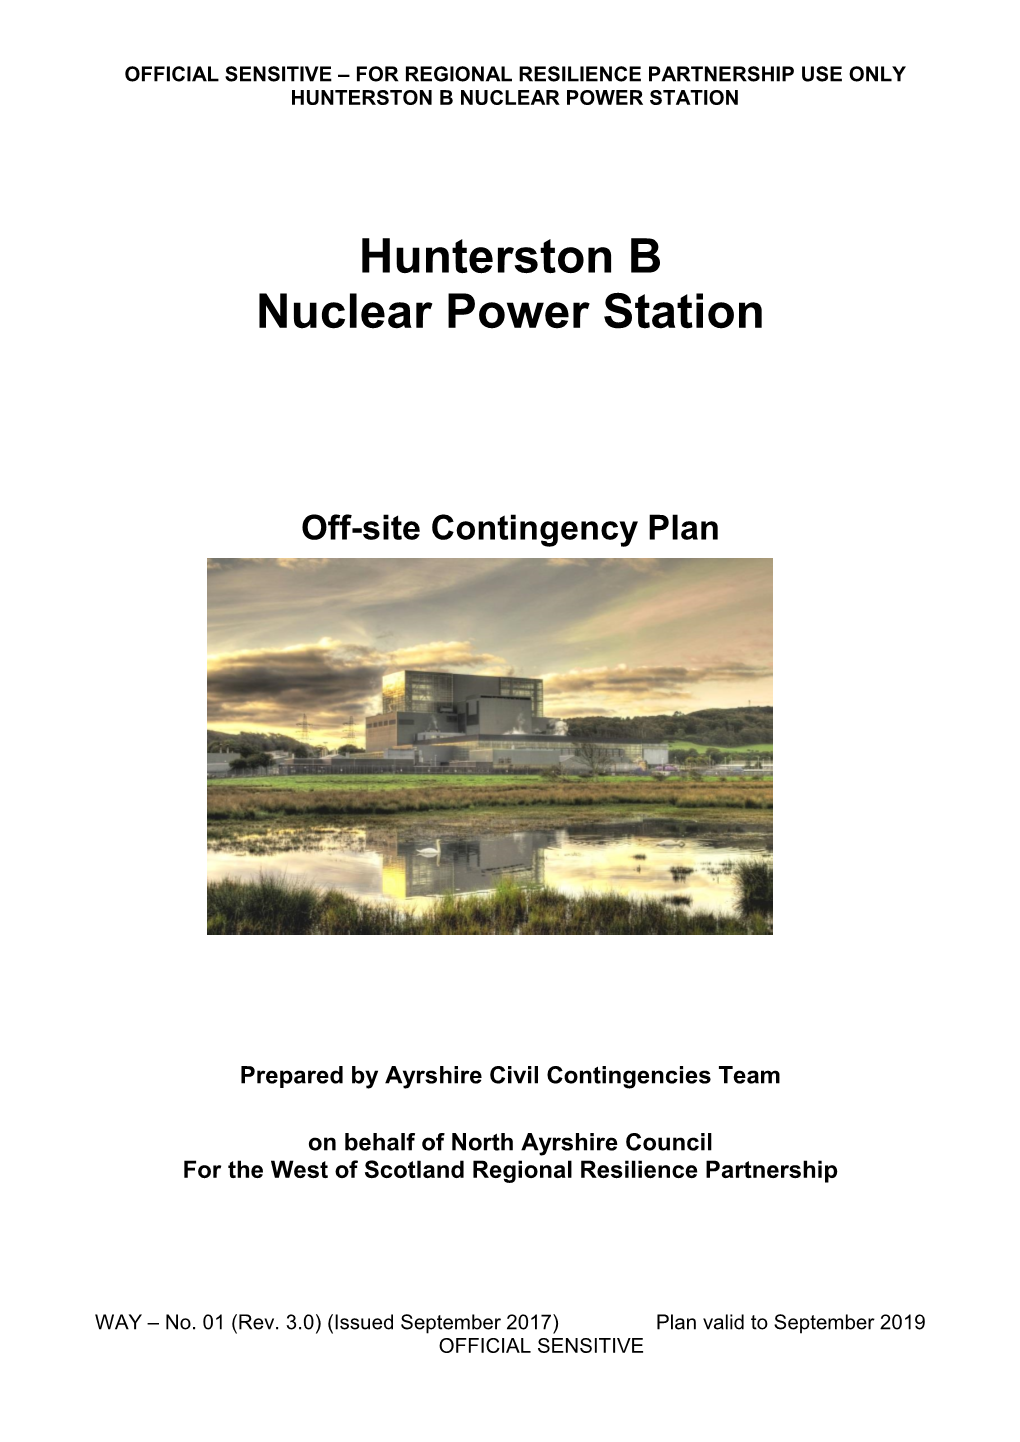 HUNTERSTON B NUCLEAR POWER STATION Off-Site Nuclear Emergency